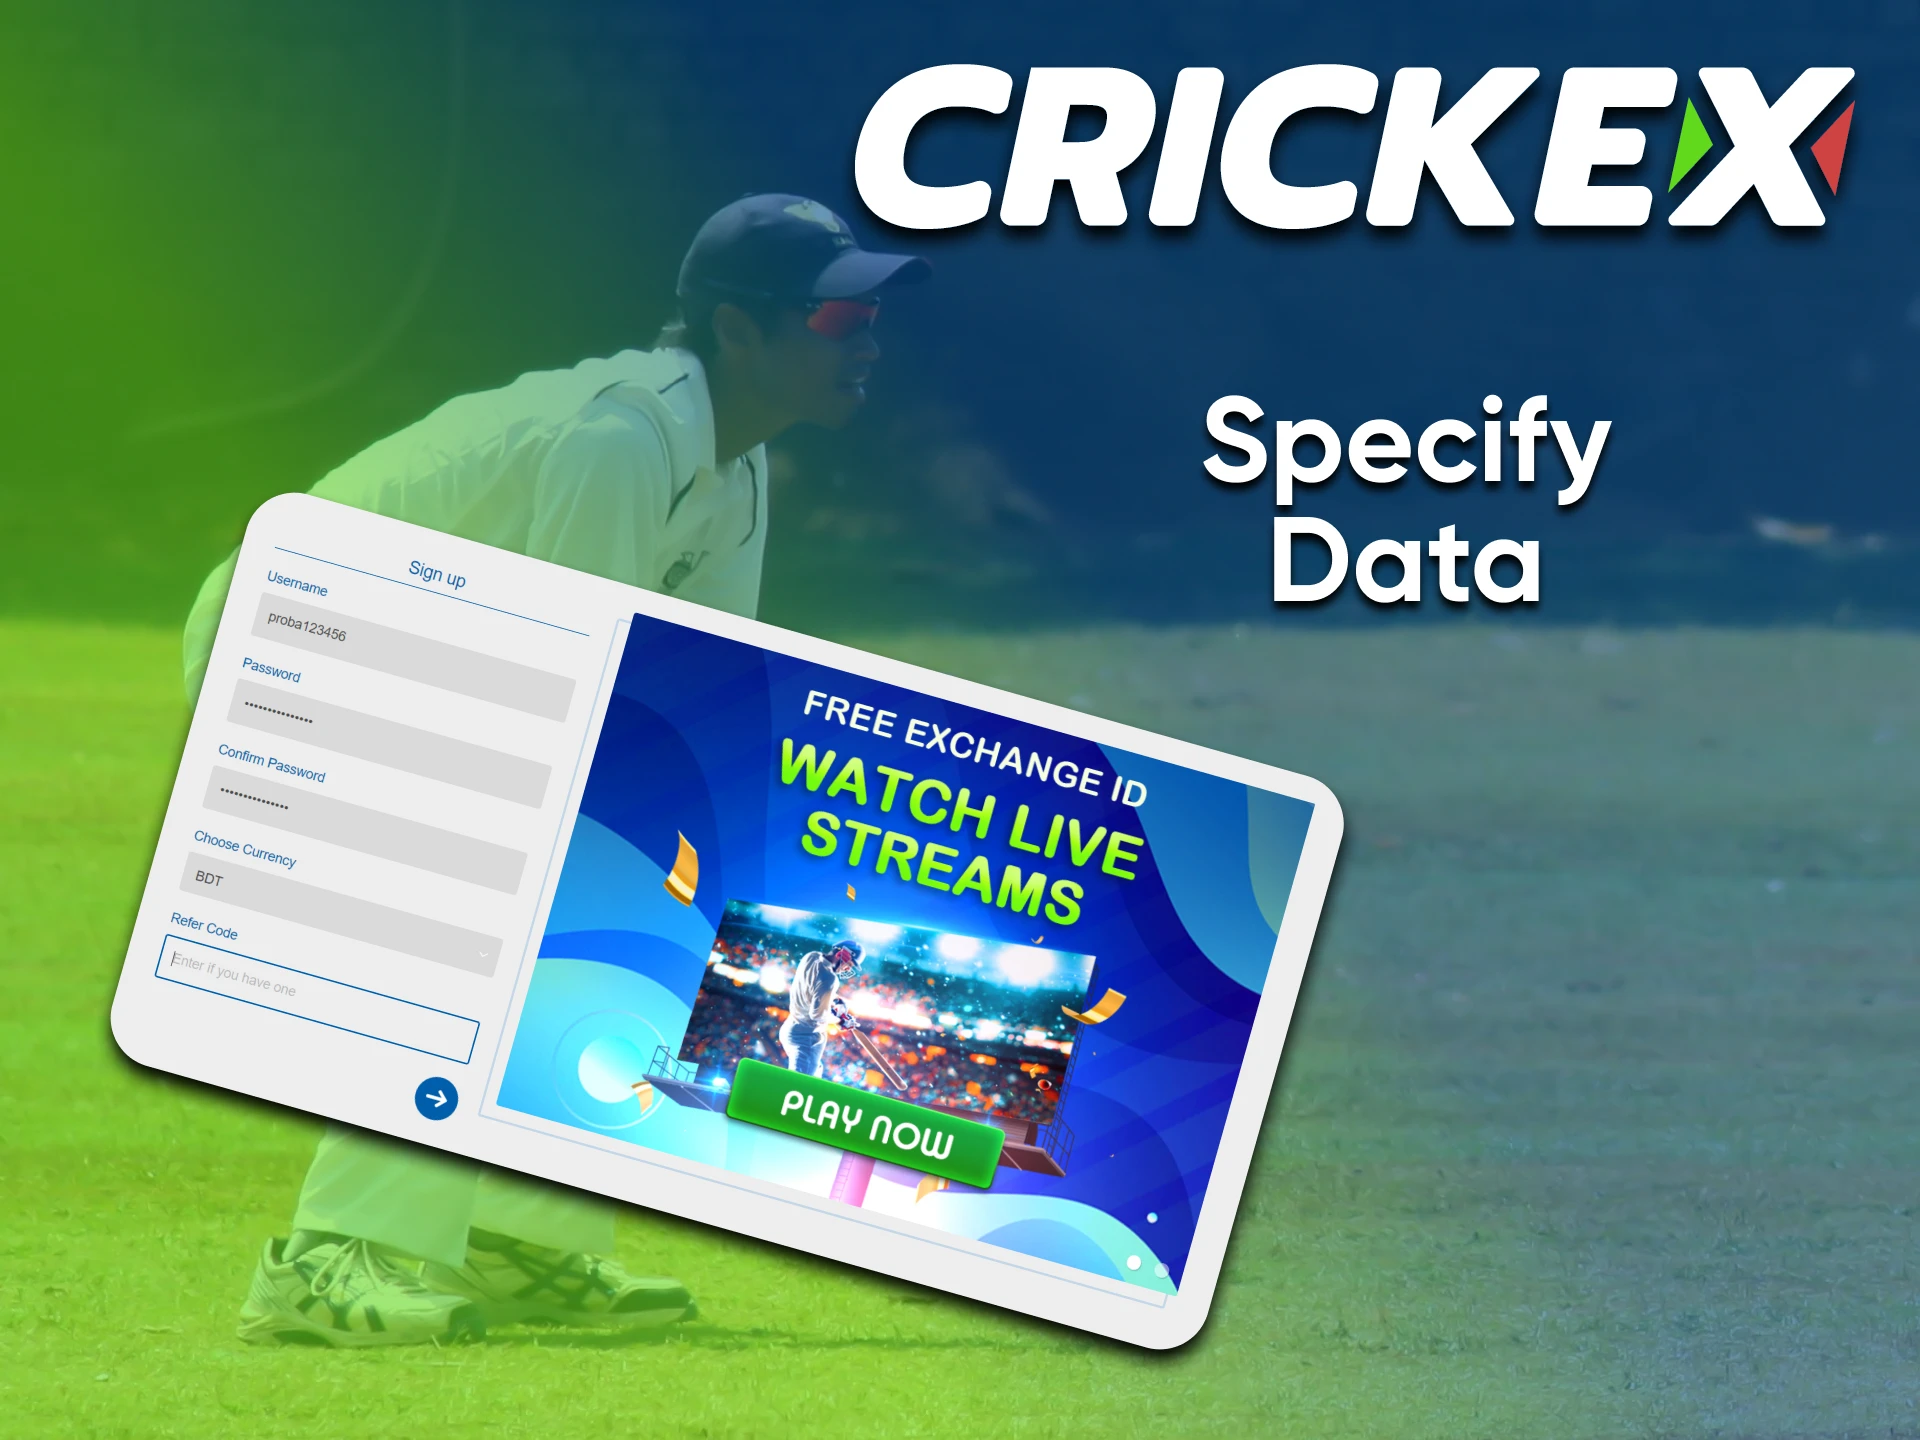 To create an account in Crickex, you need to enter data.